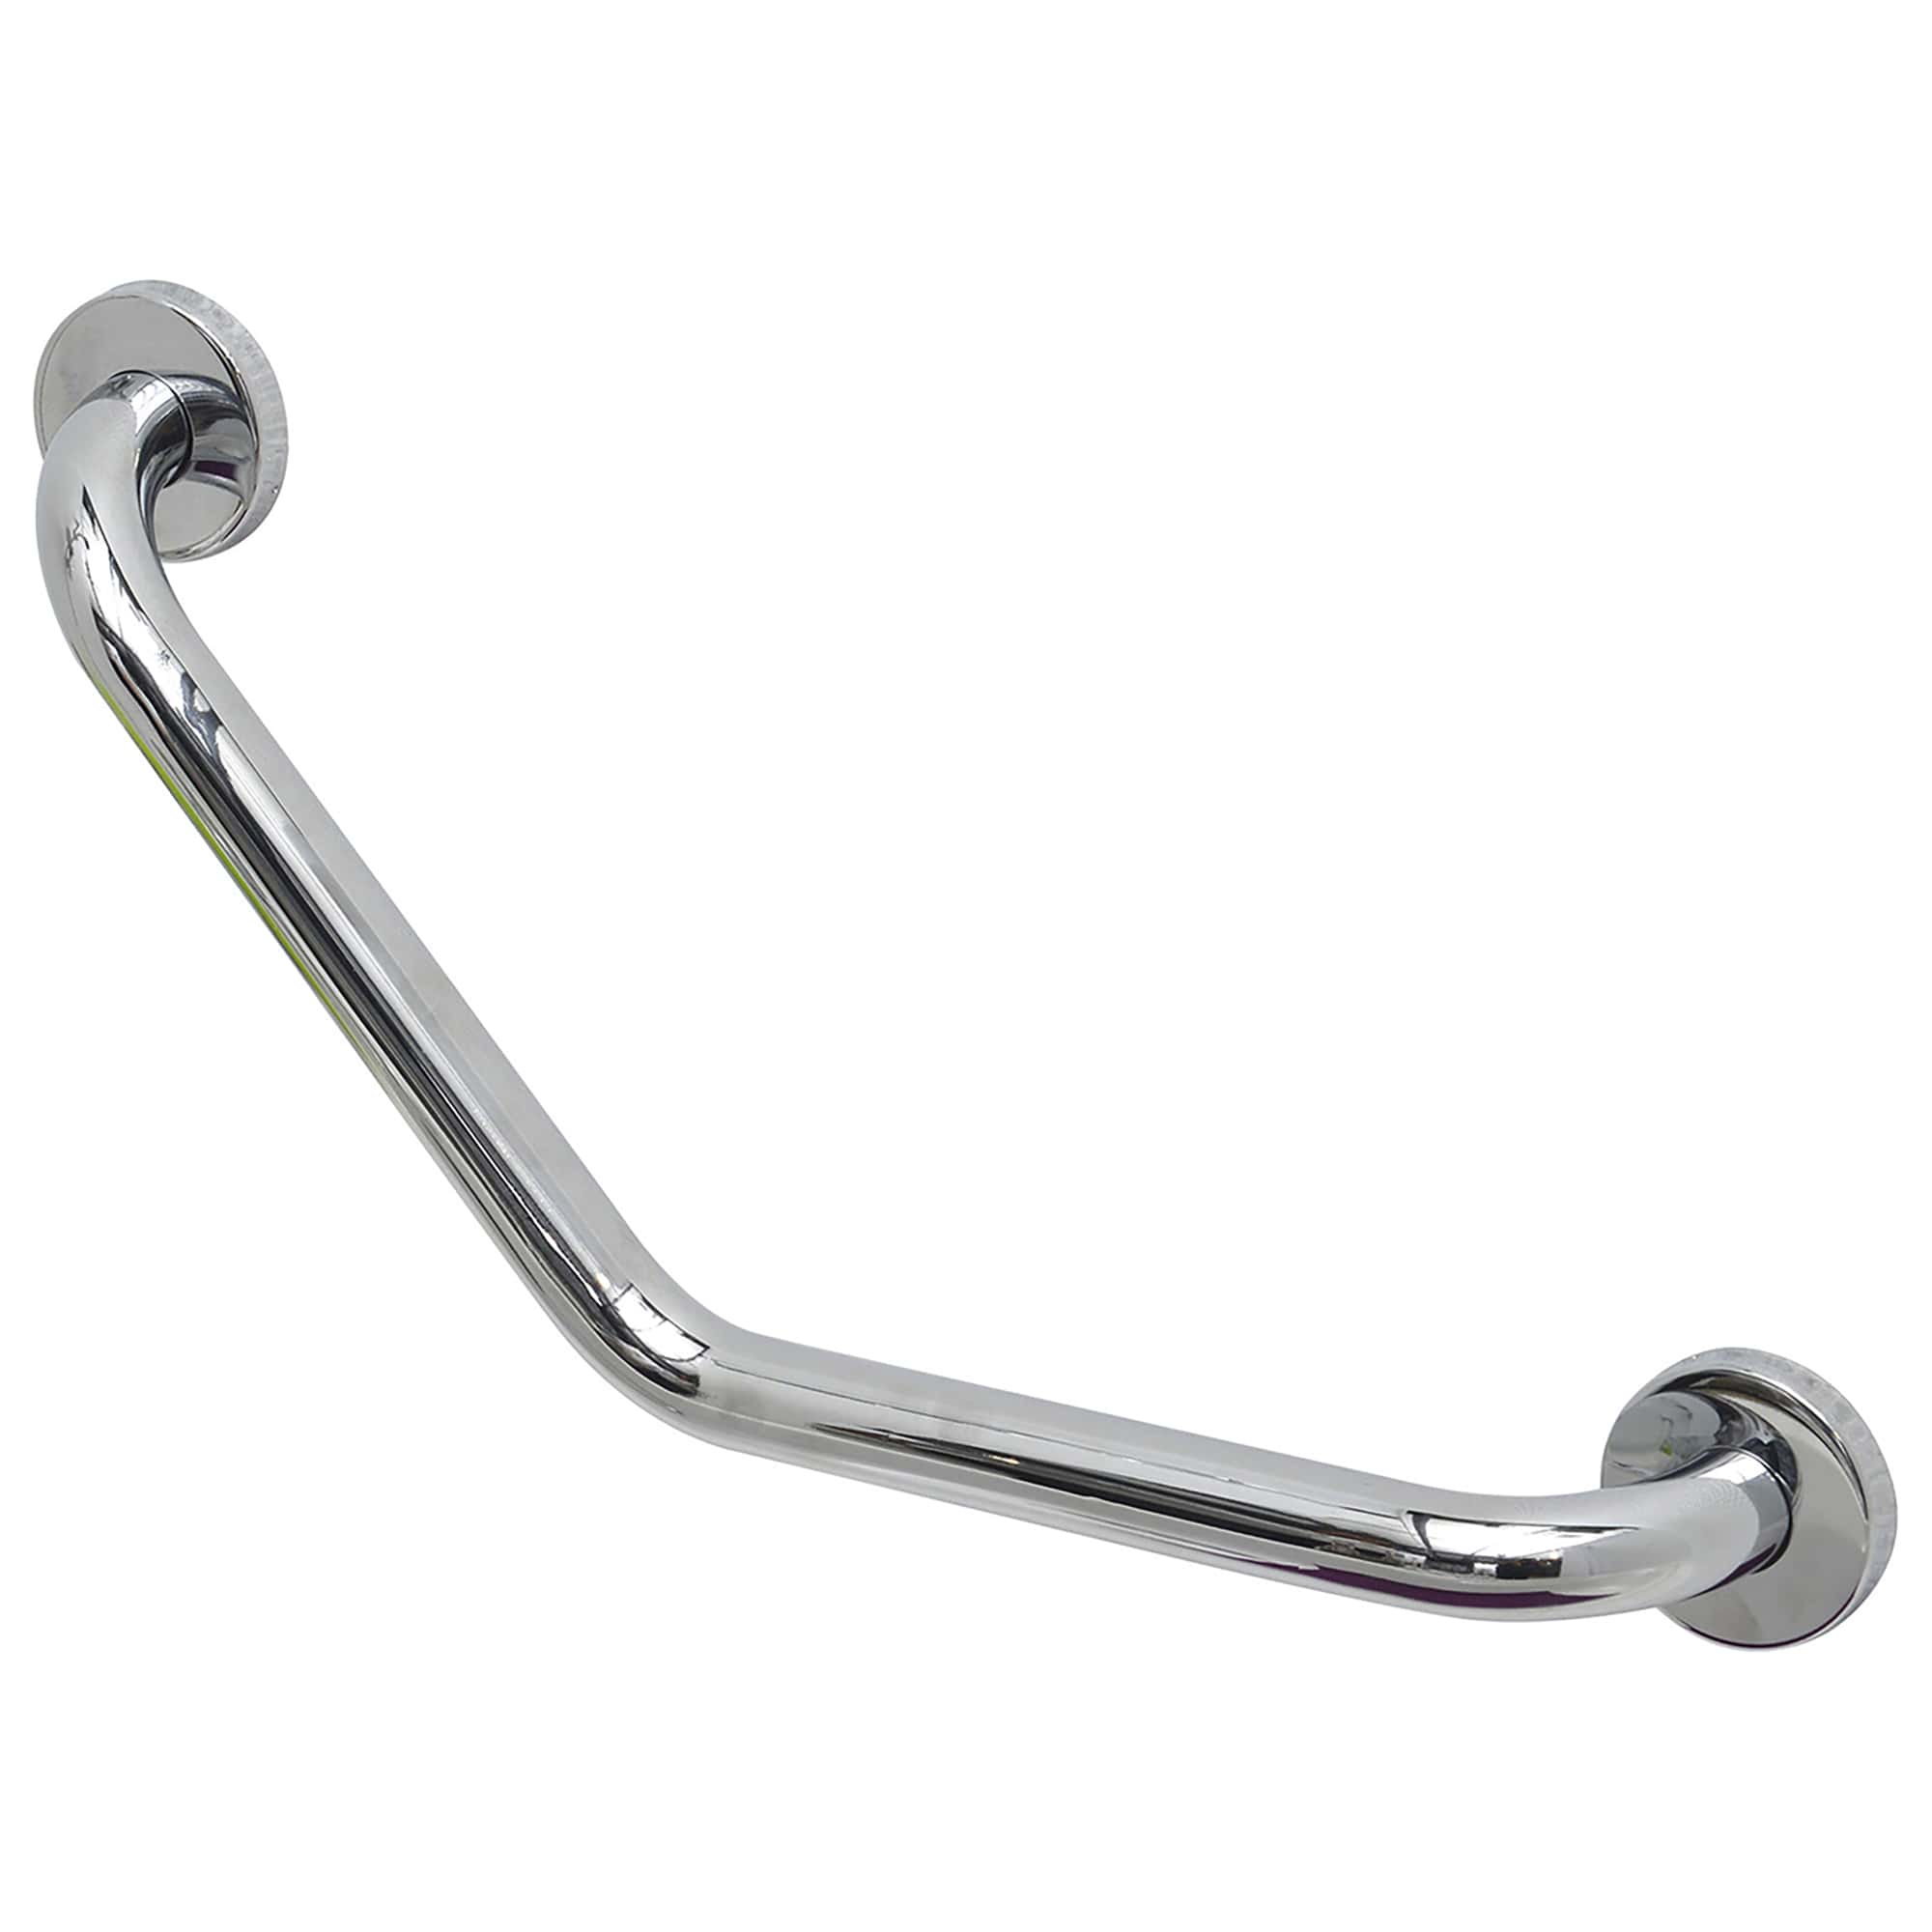 Stainless-Steel-Bath-and-Shower-Curved-Grab-Bar-Concealed-Mounting-Snap-Flange-1-Diameter-8.86-x-8.86-Length-Chrome